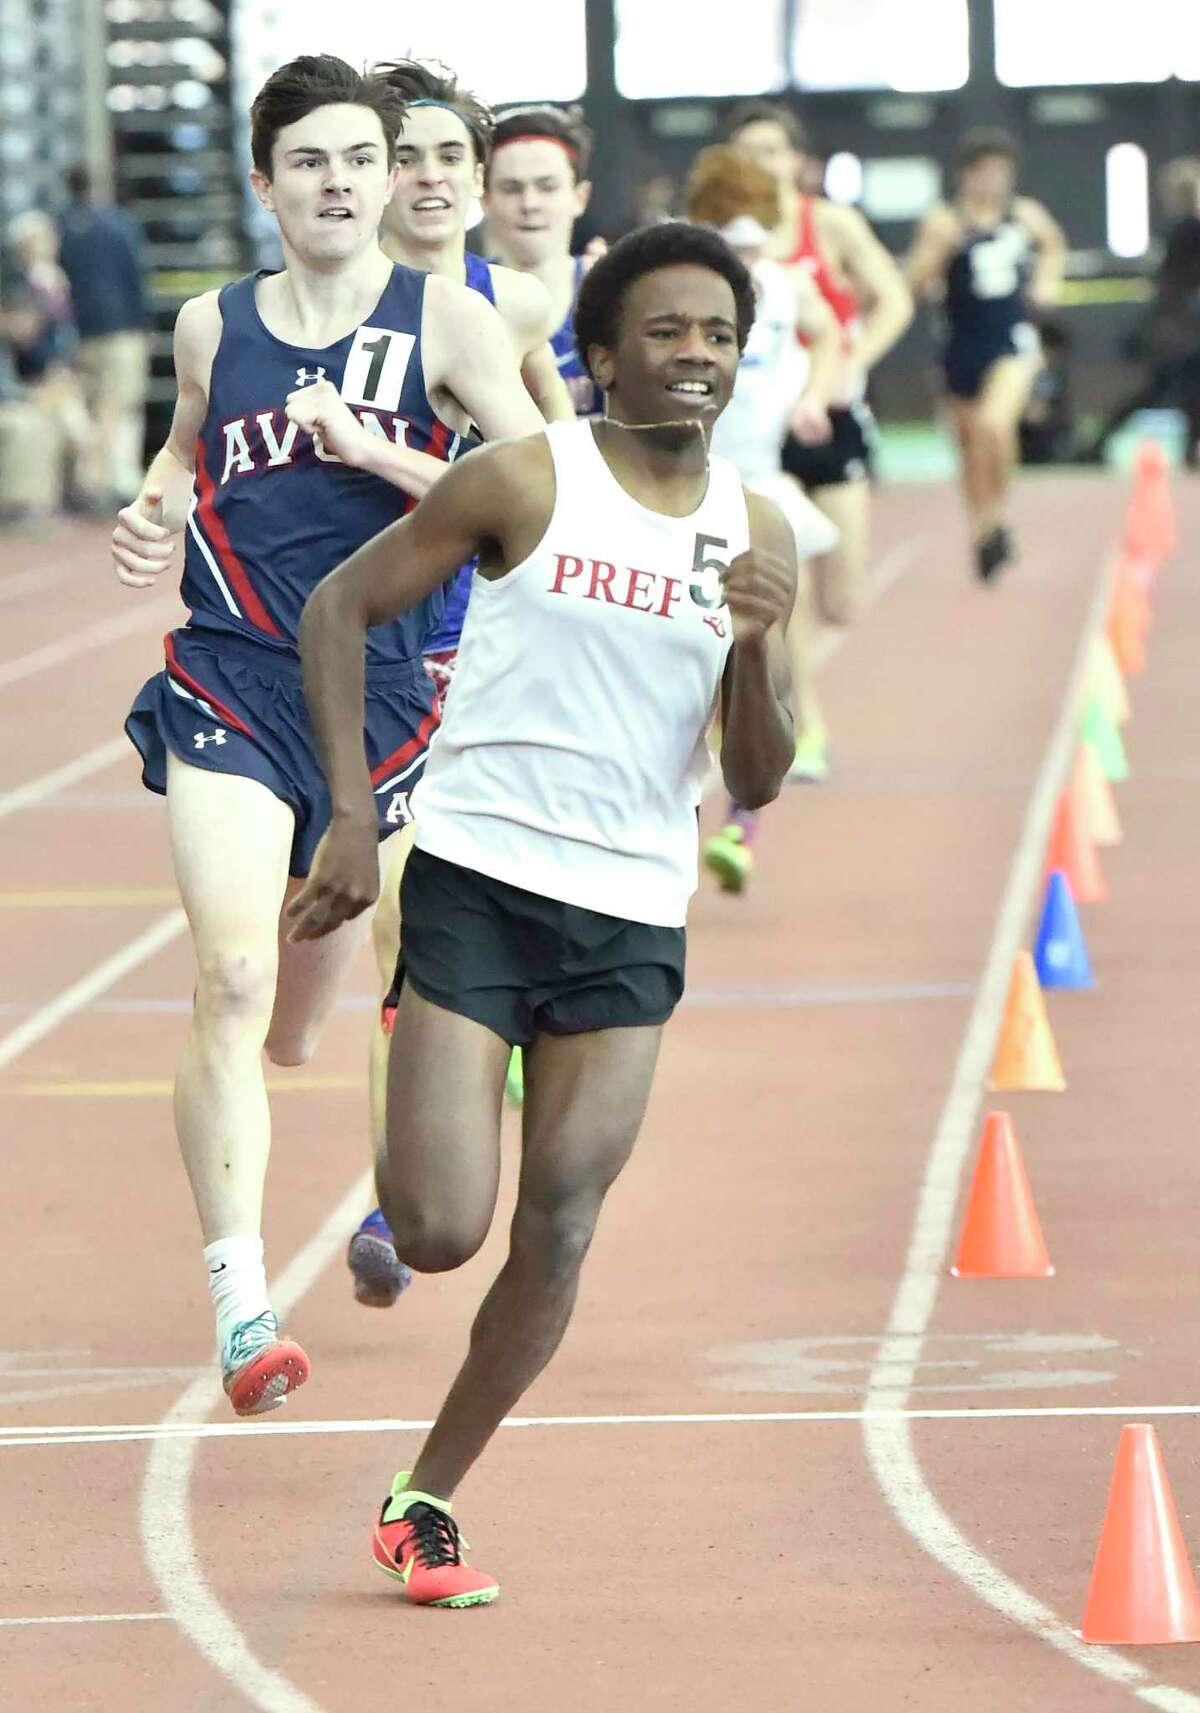 Azaan Dawson of Fairfield Prep leads the pack early against eventual winner Jack Martin of Avon, left, and Alec Sauter of Tolland during the 1600-meter run at the CIAC State Open Indoor Track Championship at the Floyd Little Athletic Center in New Haven in February.